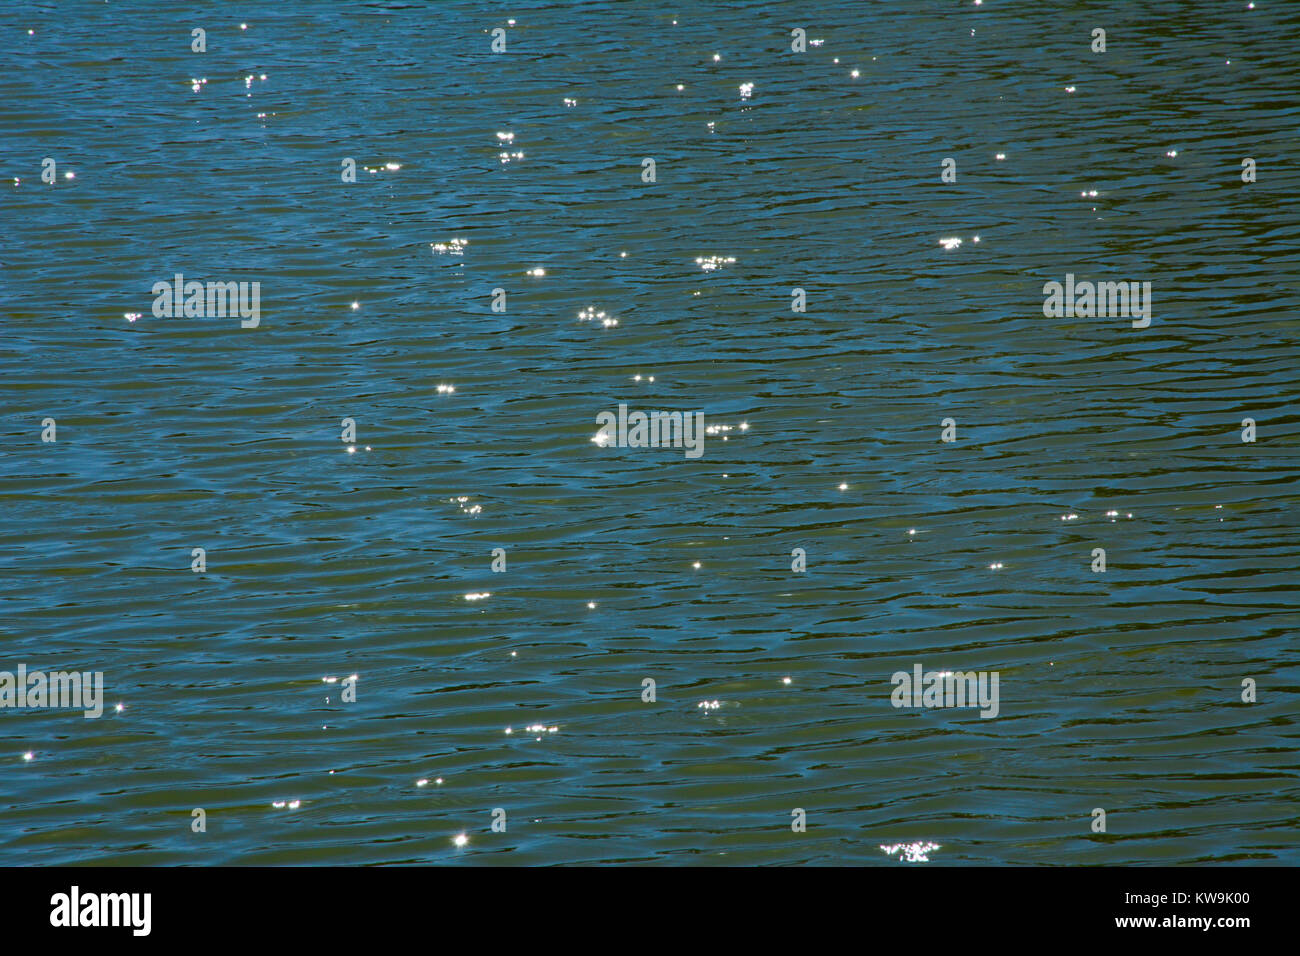 Sun rays reflecting star effect in water surface Stock Photo